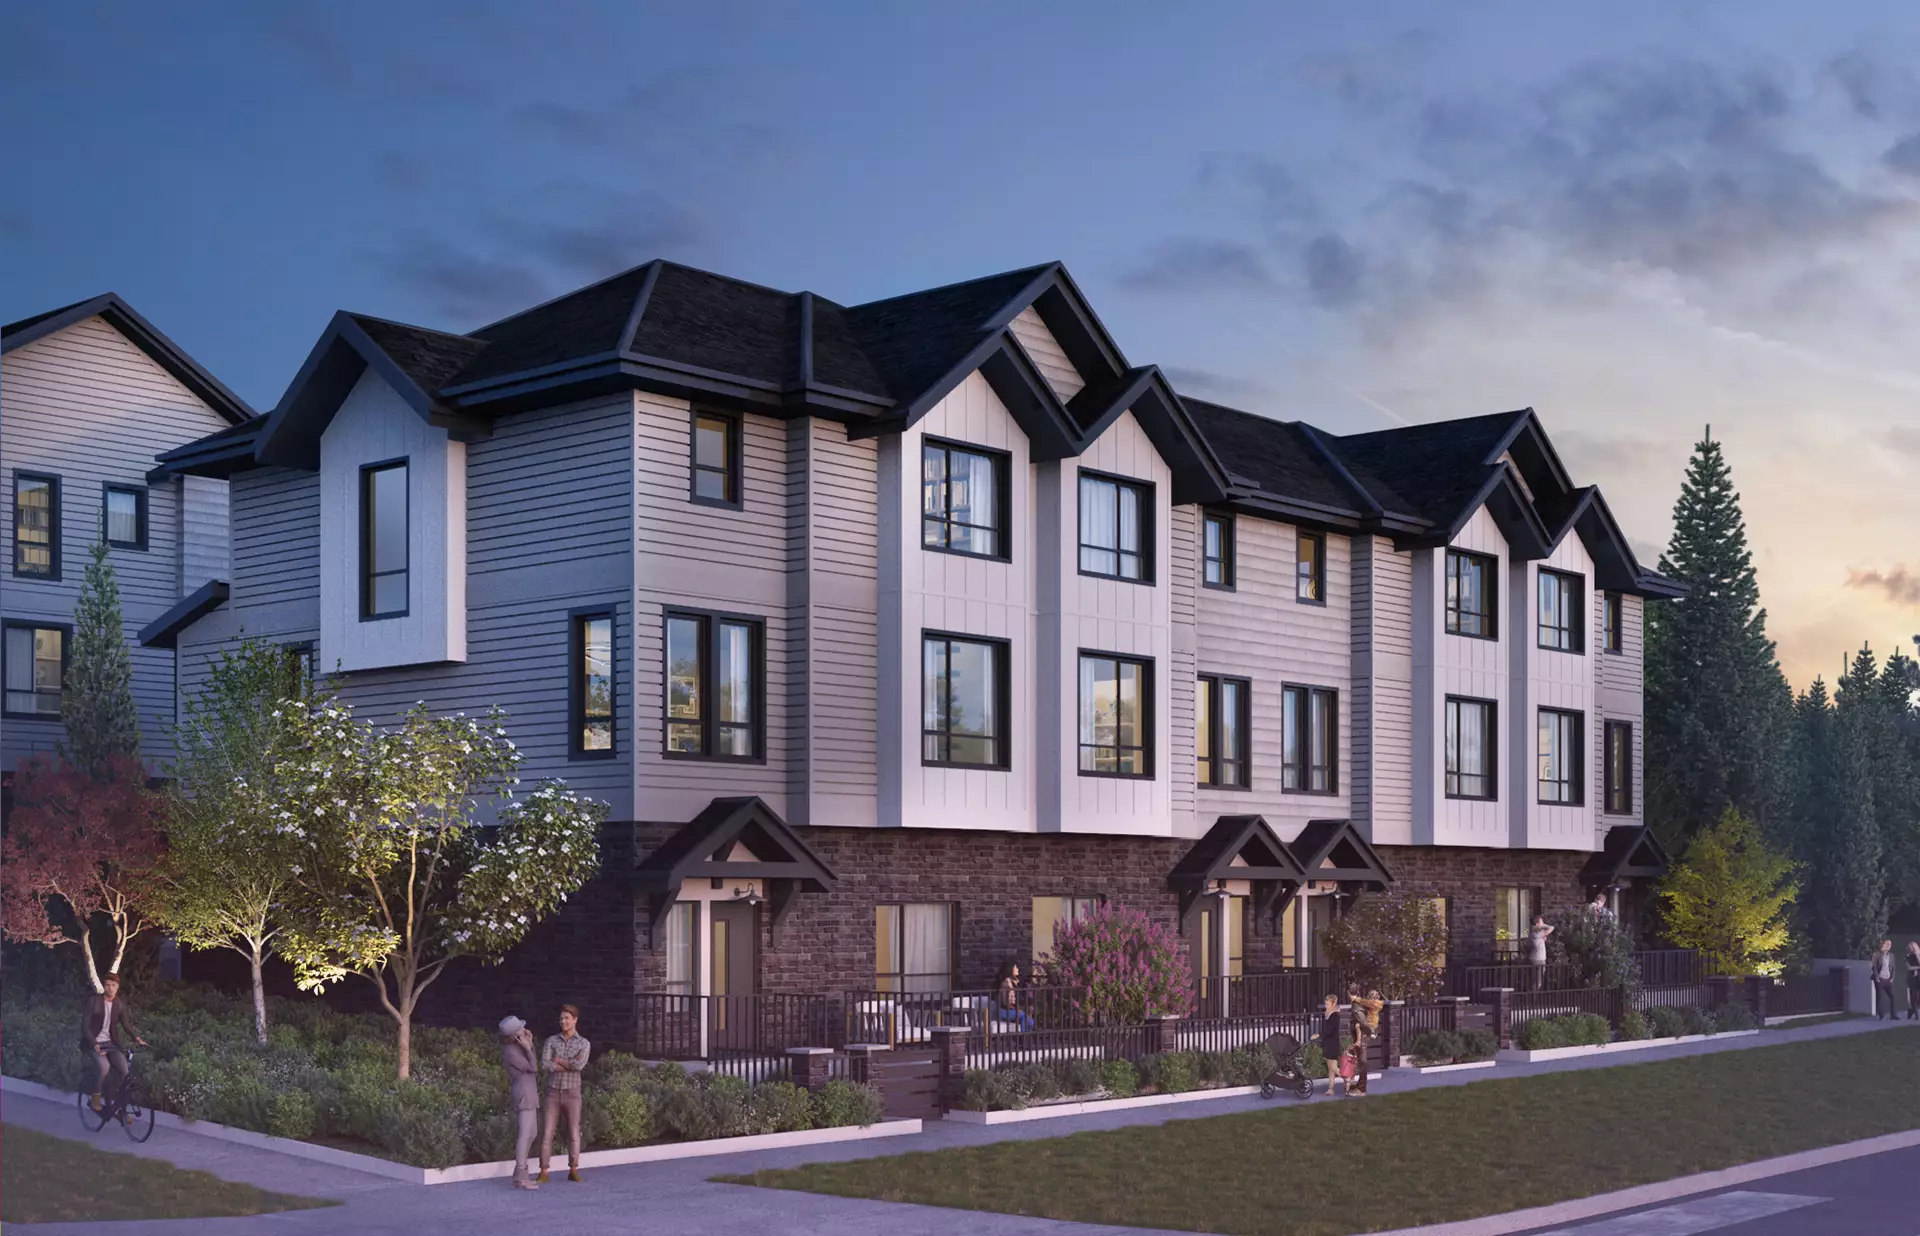 Signature Townhomes is a 39-unit South Newton strata development by Crescent Creek Homes.